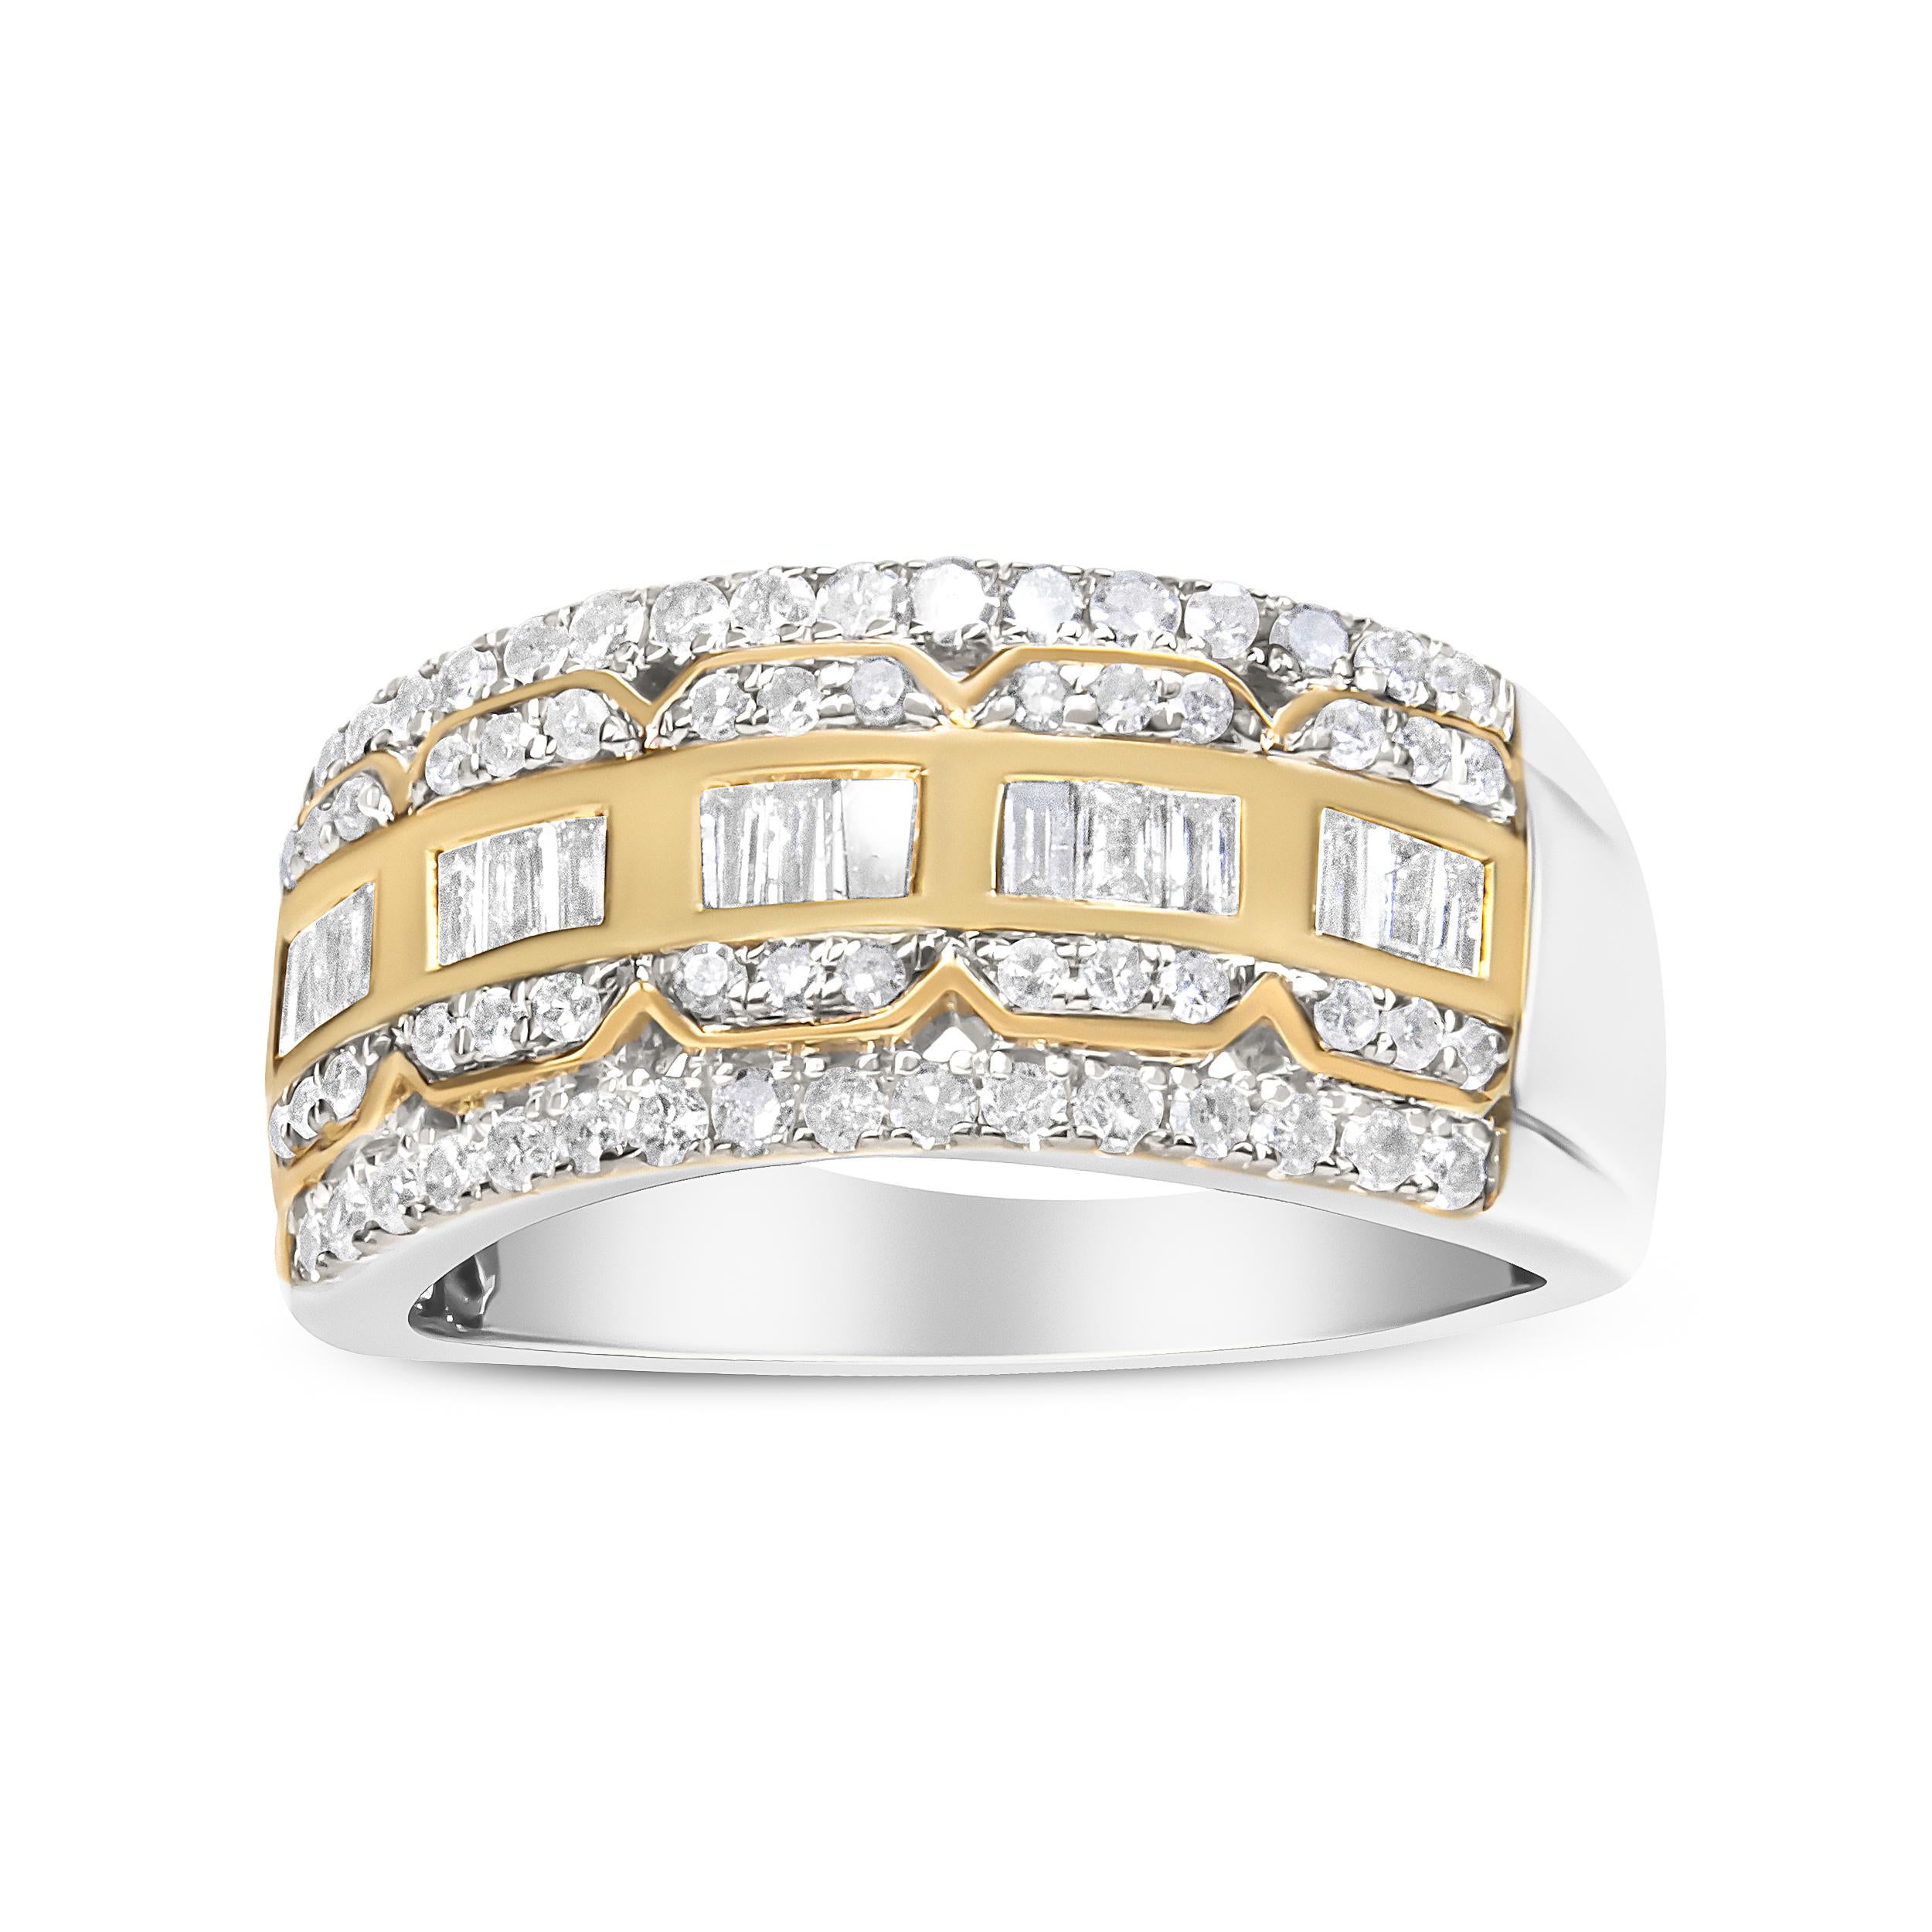 For Sale:  10K White and Yellow Gold 1.0 Carat Diamond Art Deco Multi-Row Ring Band 3